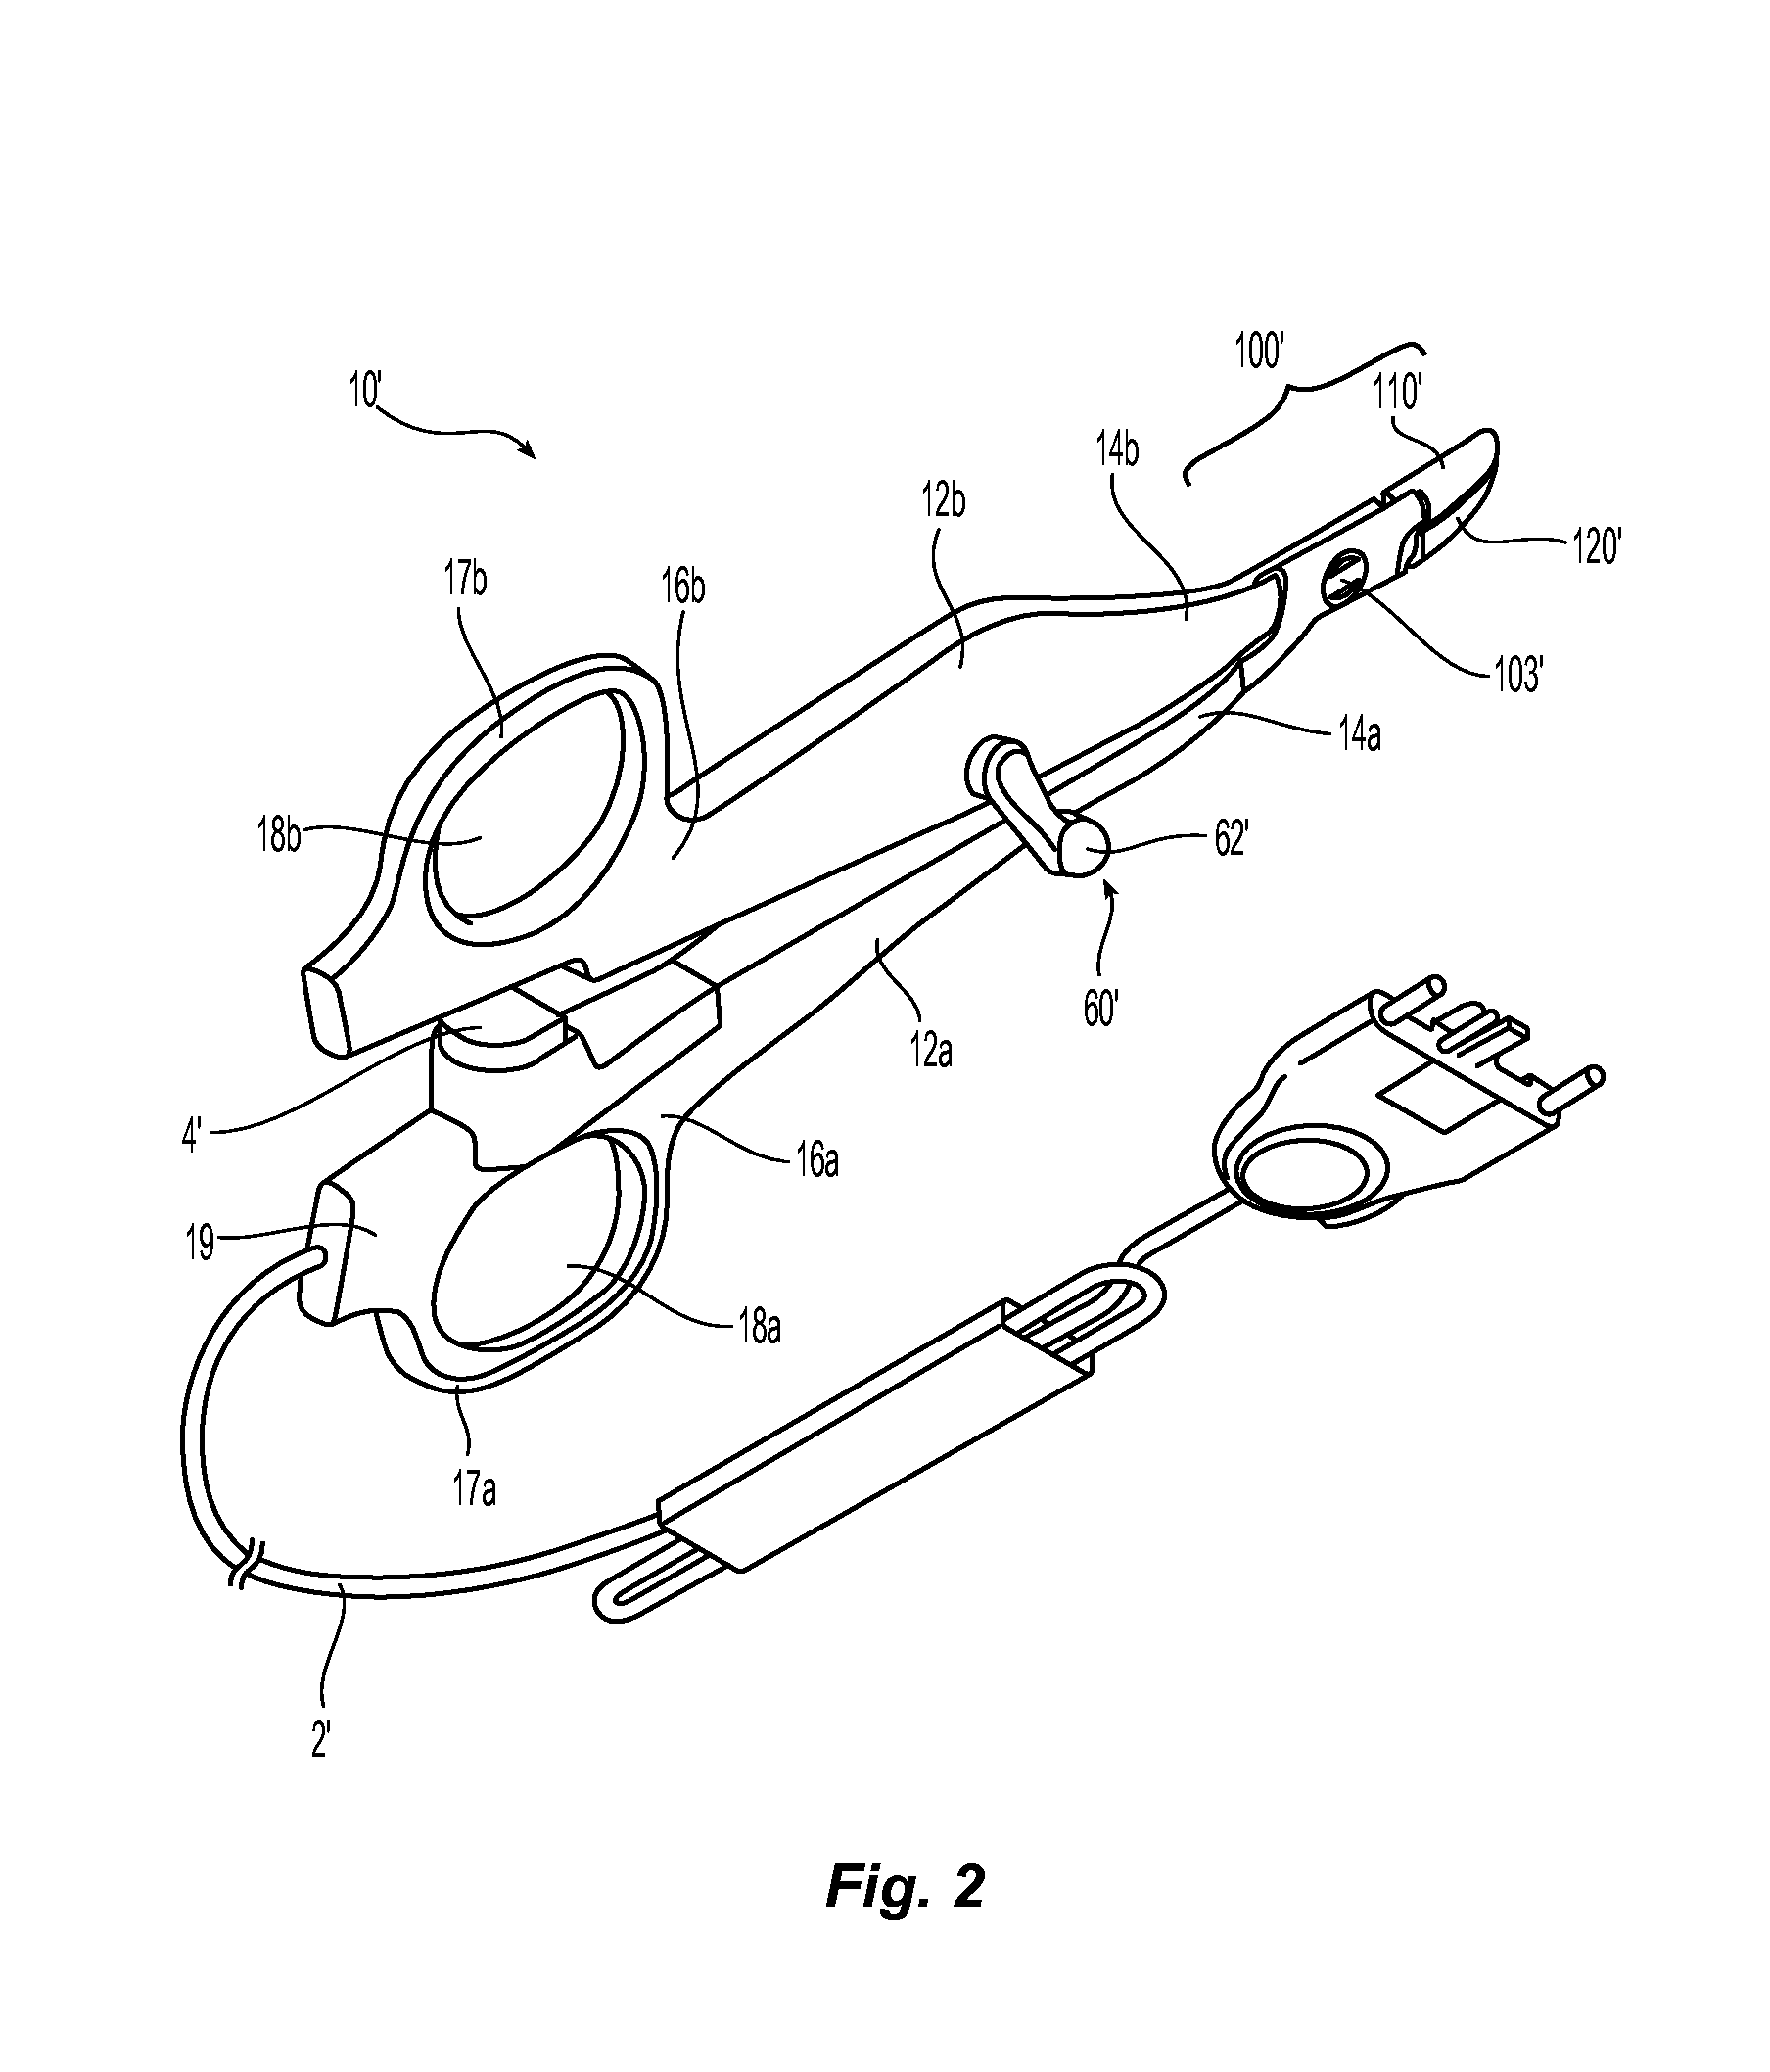 Surgical instruments and methods for performing tonsillectomy and adenoidectomy procedures